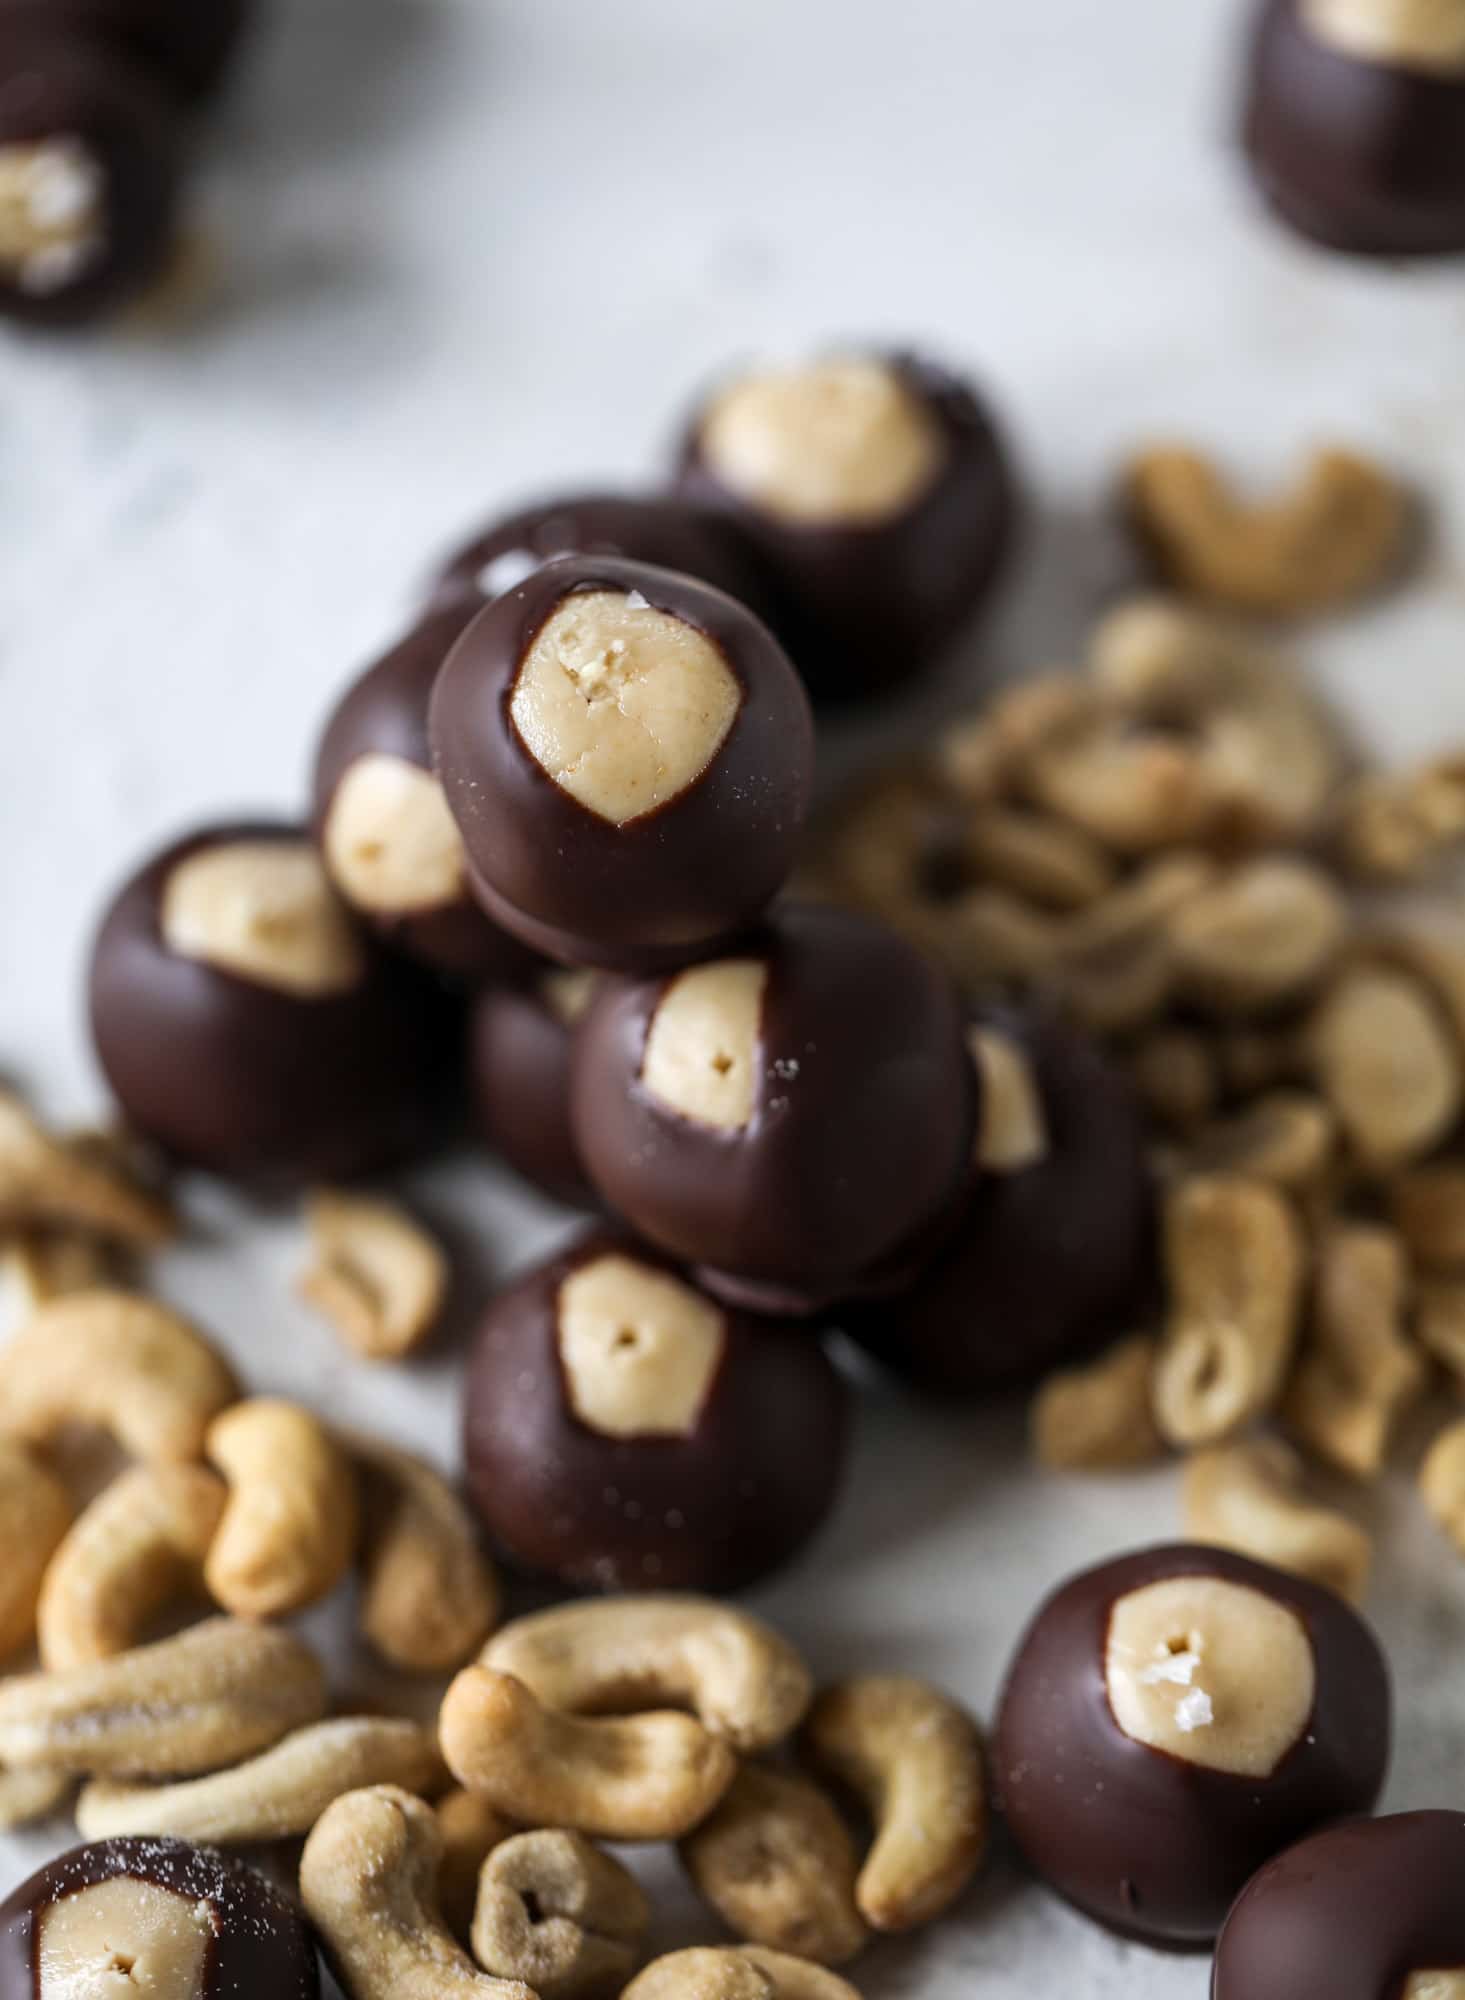 These cashew butter buckeyes are a fun and modern twist on the traditional buckeye recipe! Creamy cashew butter makes a delicious, rich dough and then it's coated in chocolate and sprinkled with sea salt. Delicious! I howsweeteats.com #cashewbutter #buckeyes